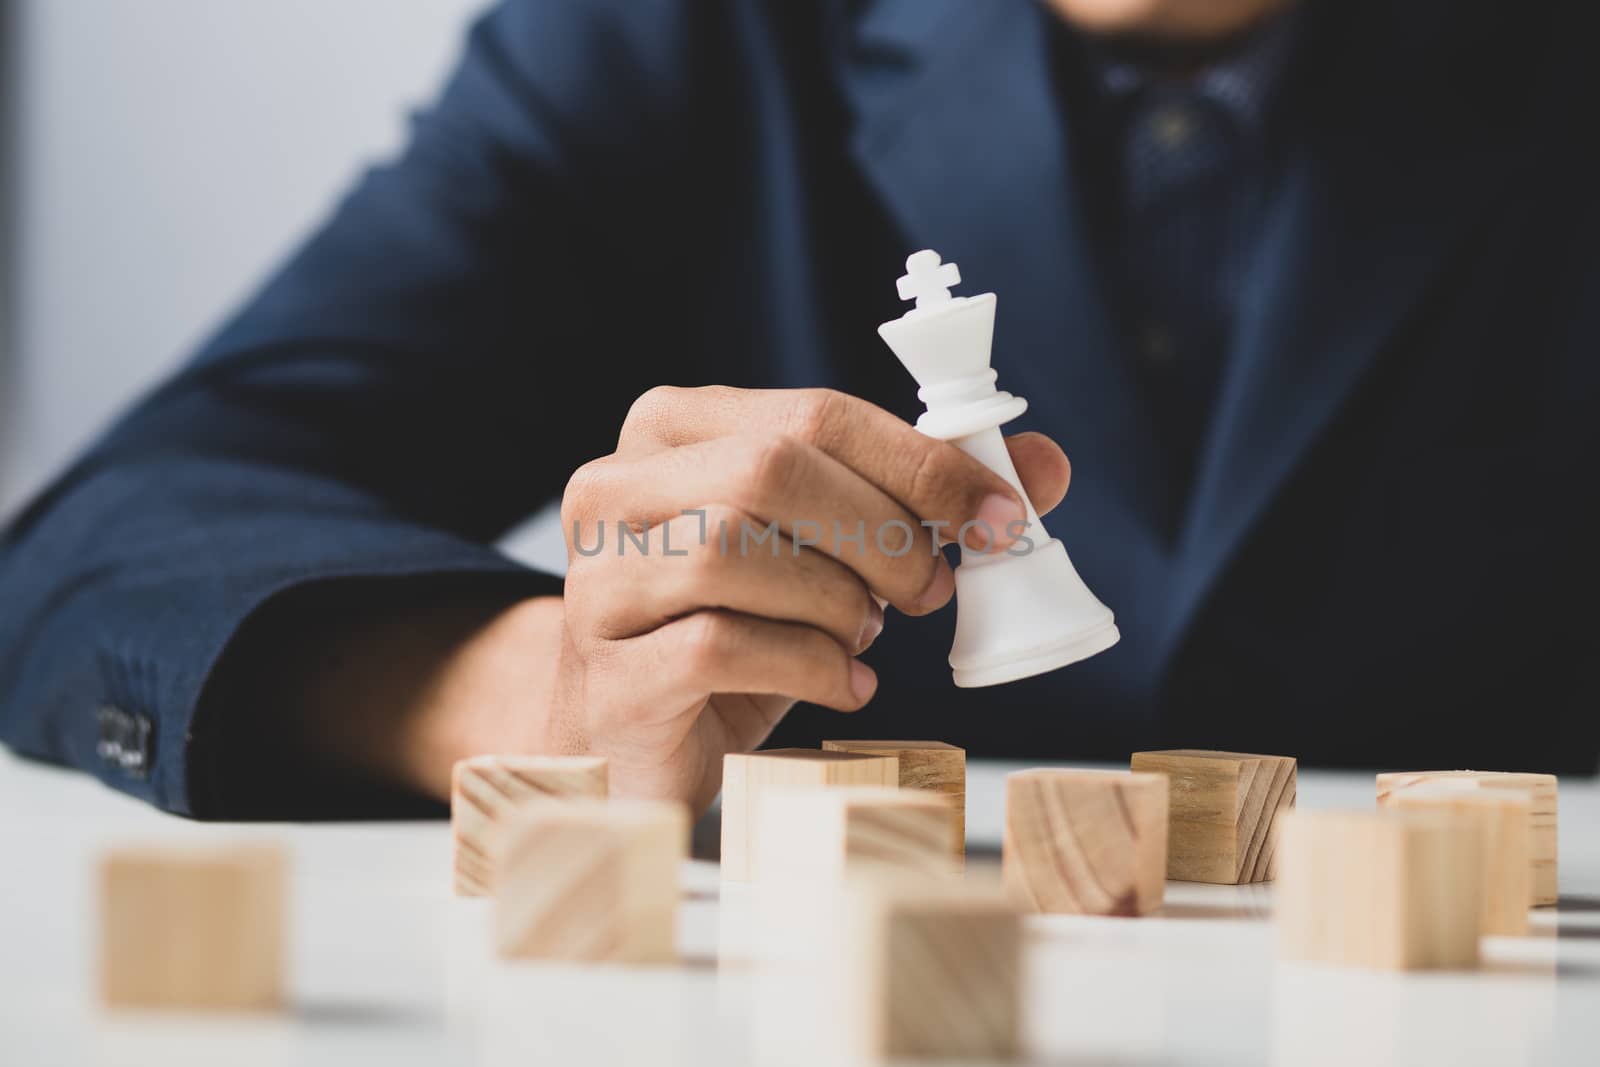 Hands of entrepreneur business man holding wooden blocks placing by golfmhee